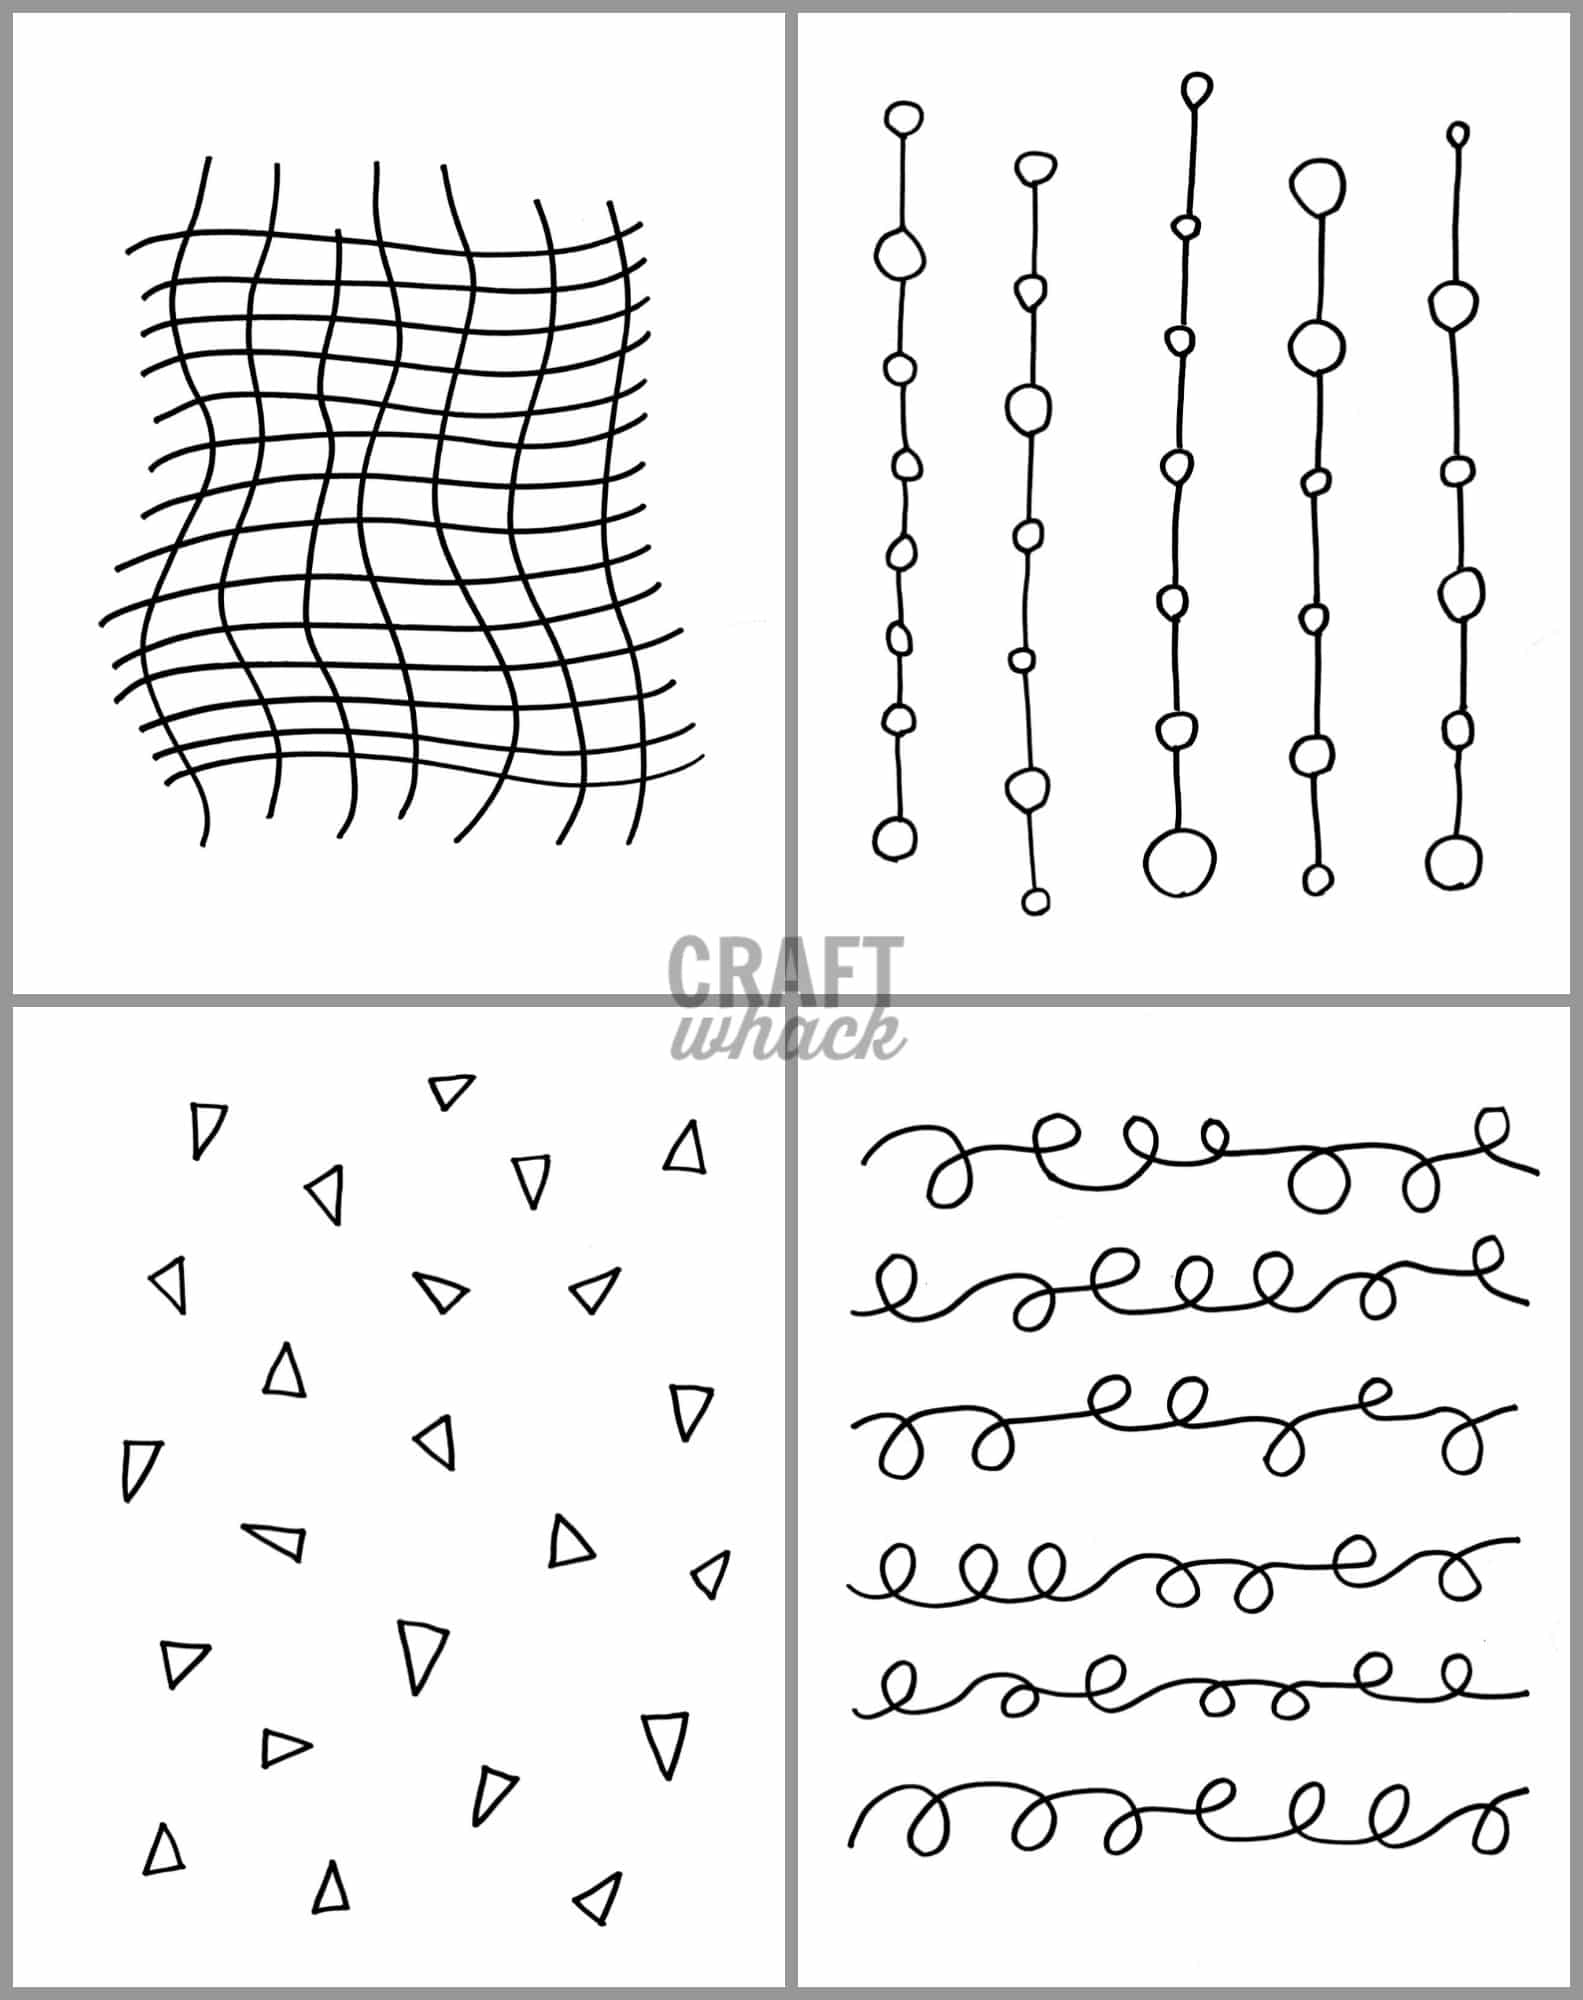 Aesthetic Minimalist Coloring Pages - Intricate Designs Free Coloring